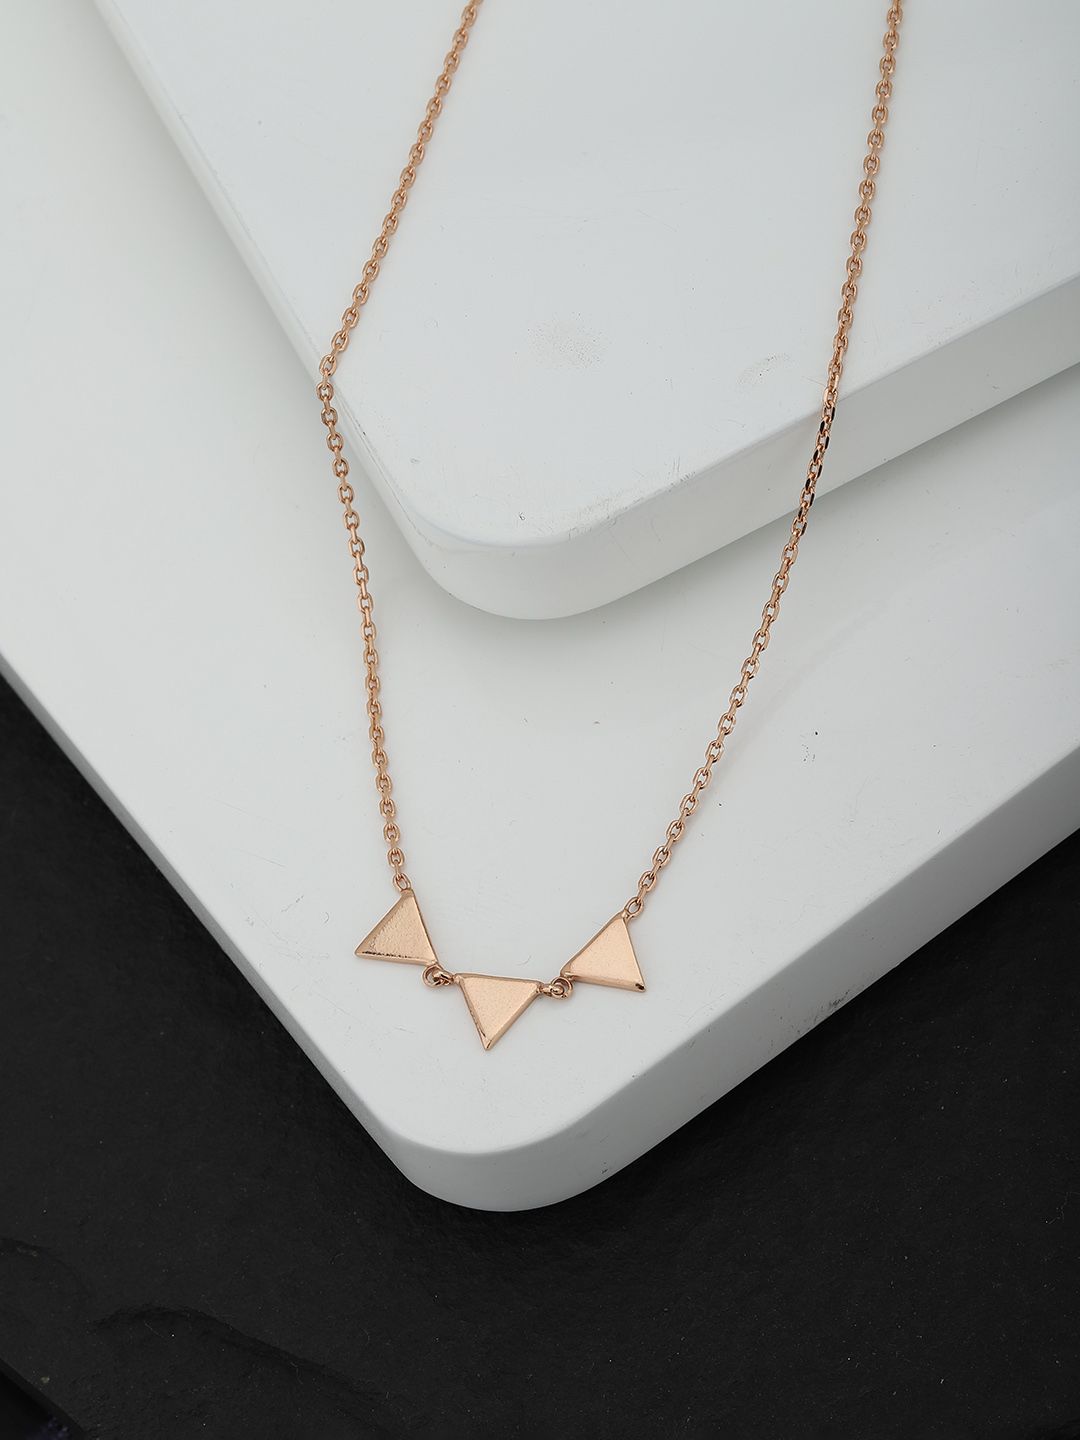 Carlton London Rose Gold-Plated Necklace Price in India